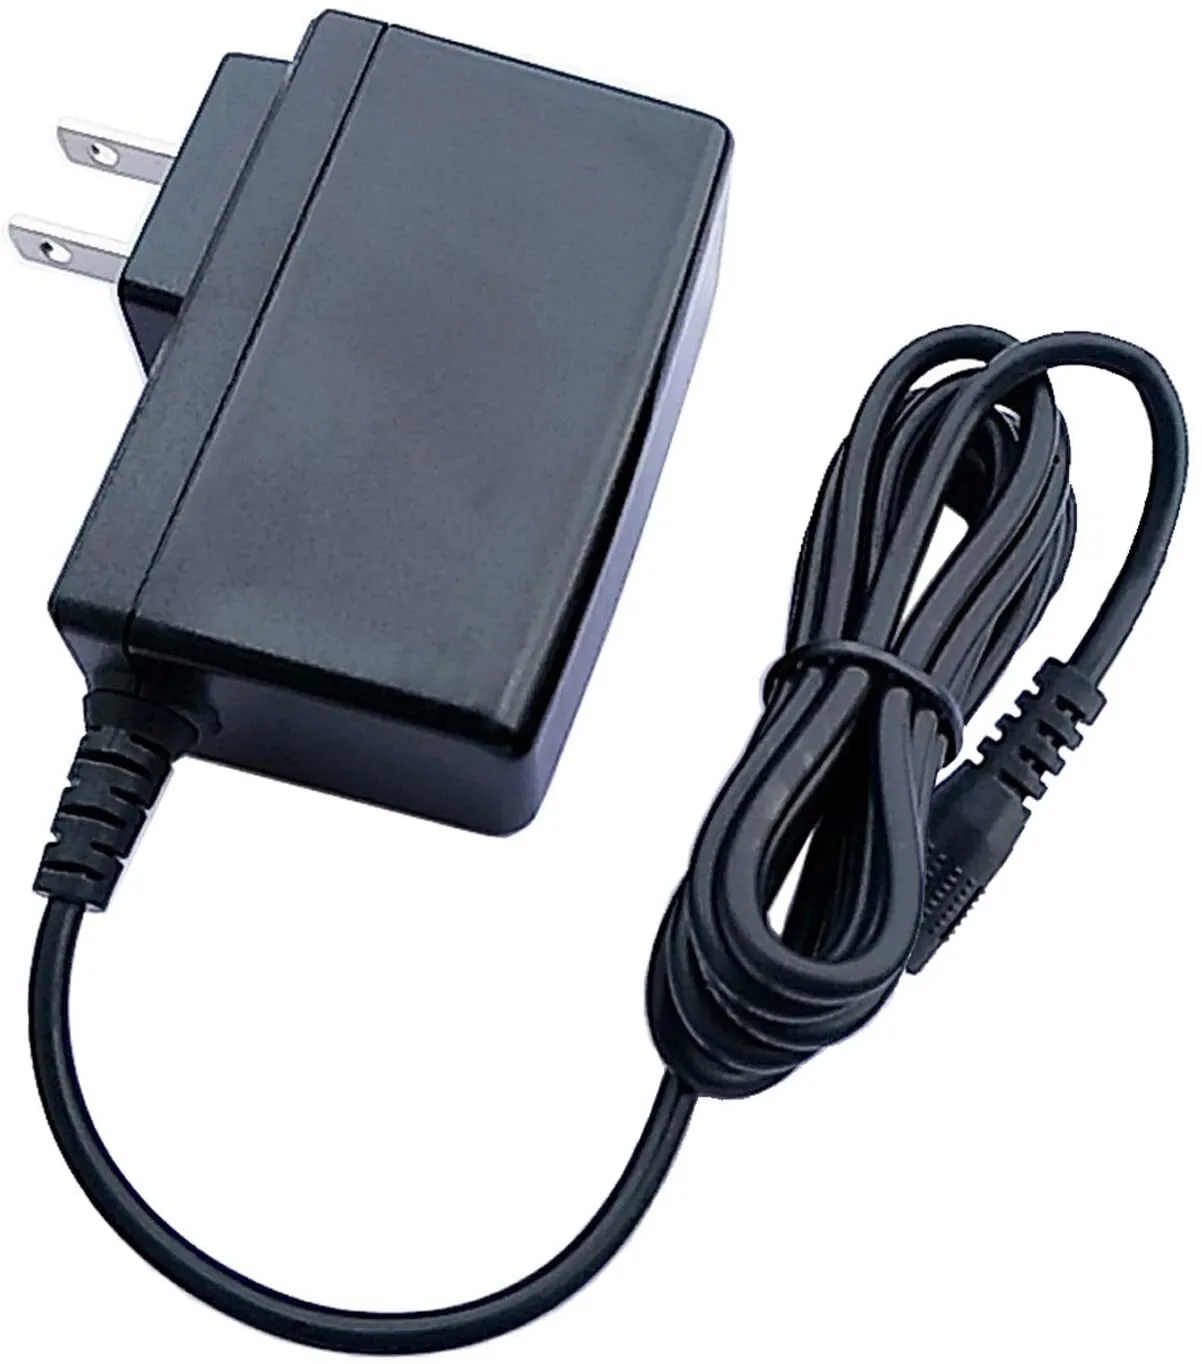 *Brand NEW*12VDC 1000mA AC/DC Adapter For ILD48-121000 12 Volts Class 2 Transformer Charger